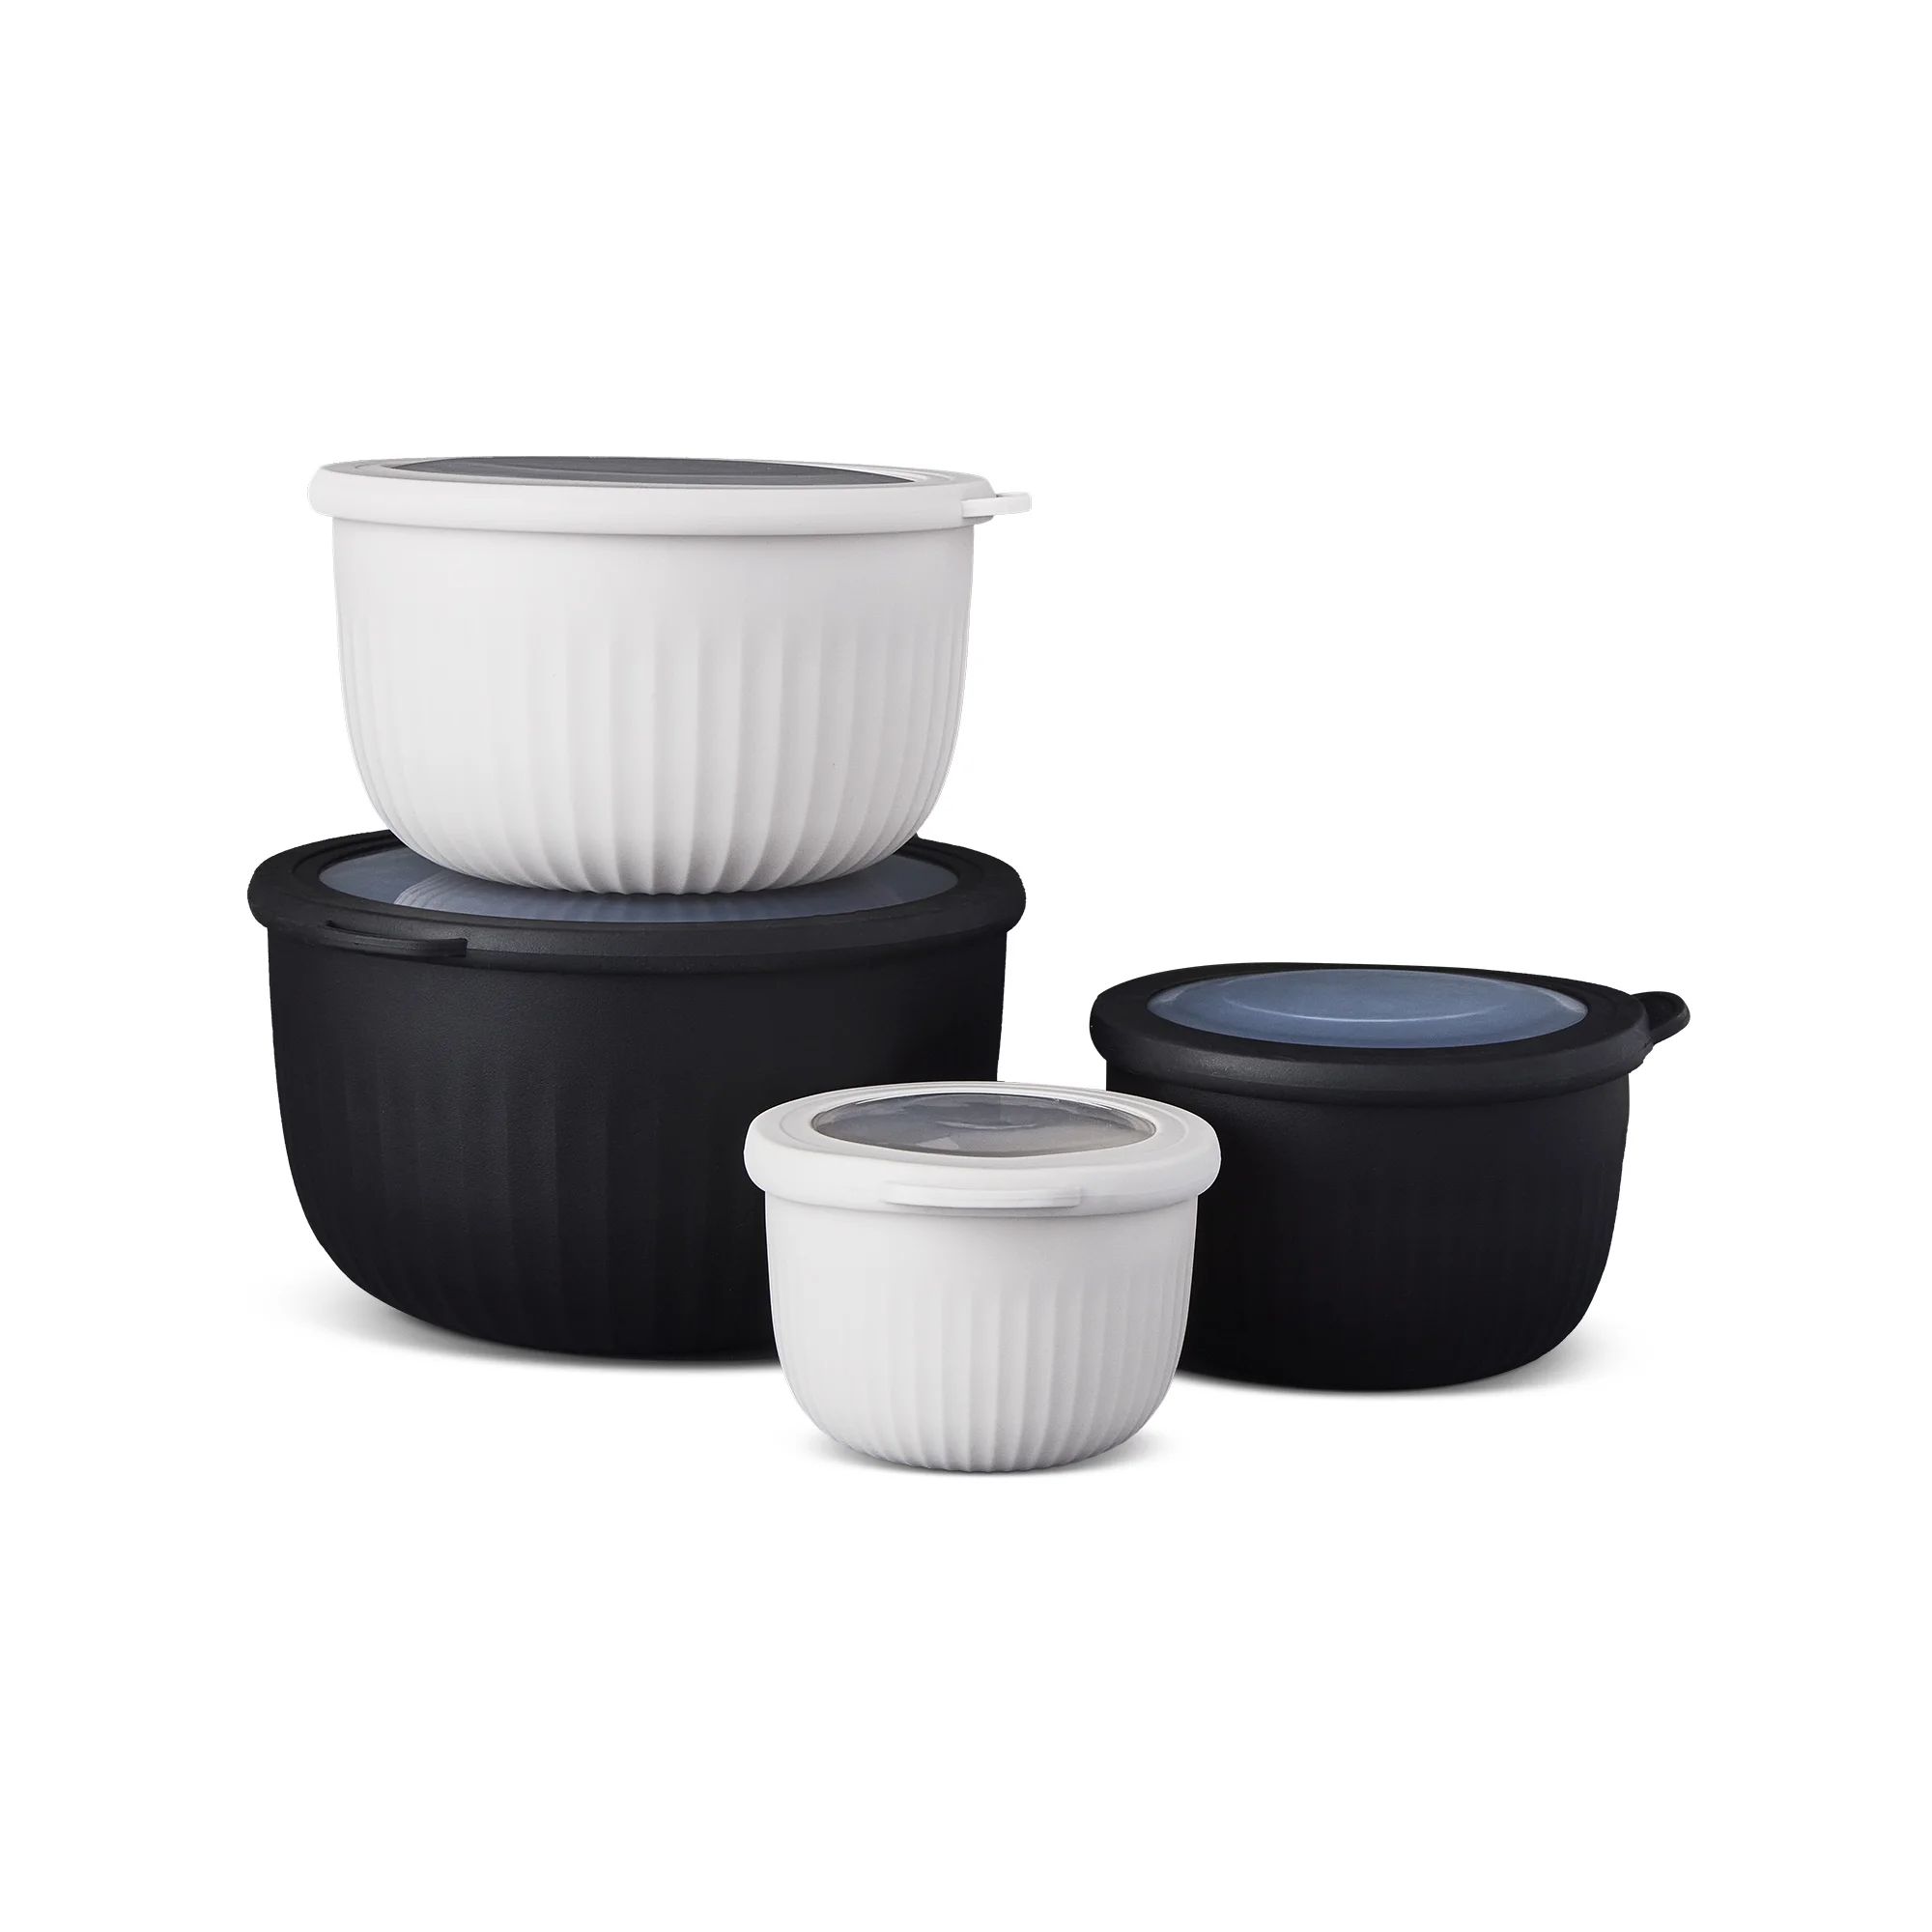 Thyme & Table 8-Piece Mixing Bowl Set, Black and Cream | Walmart (US)